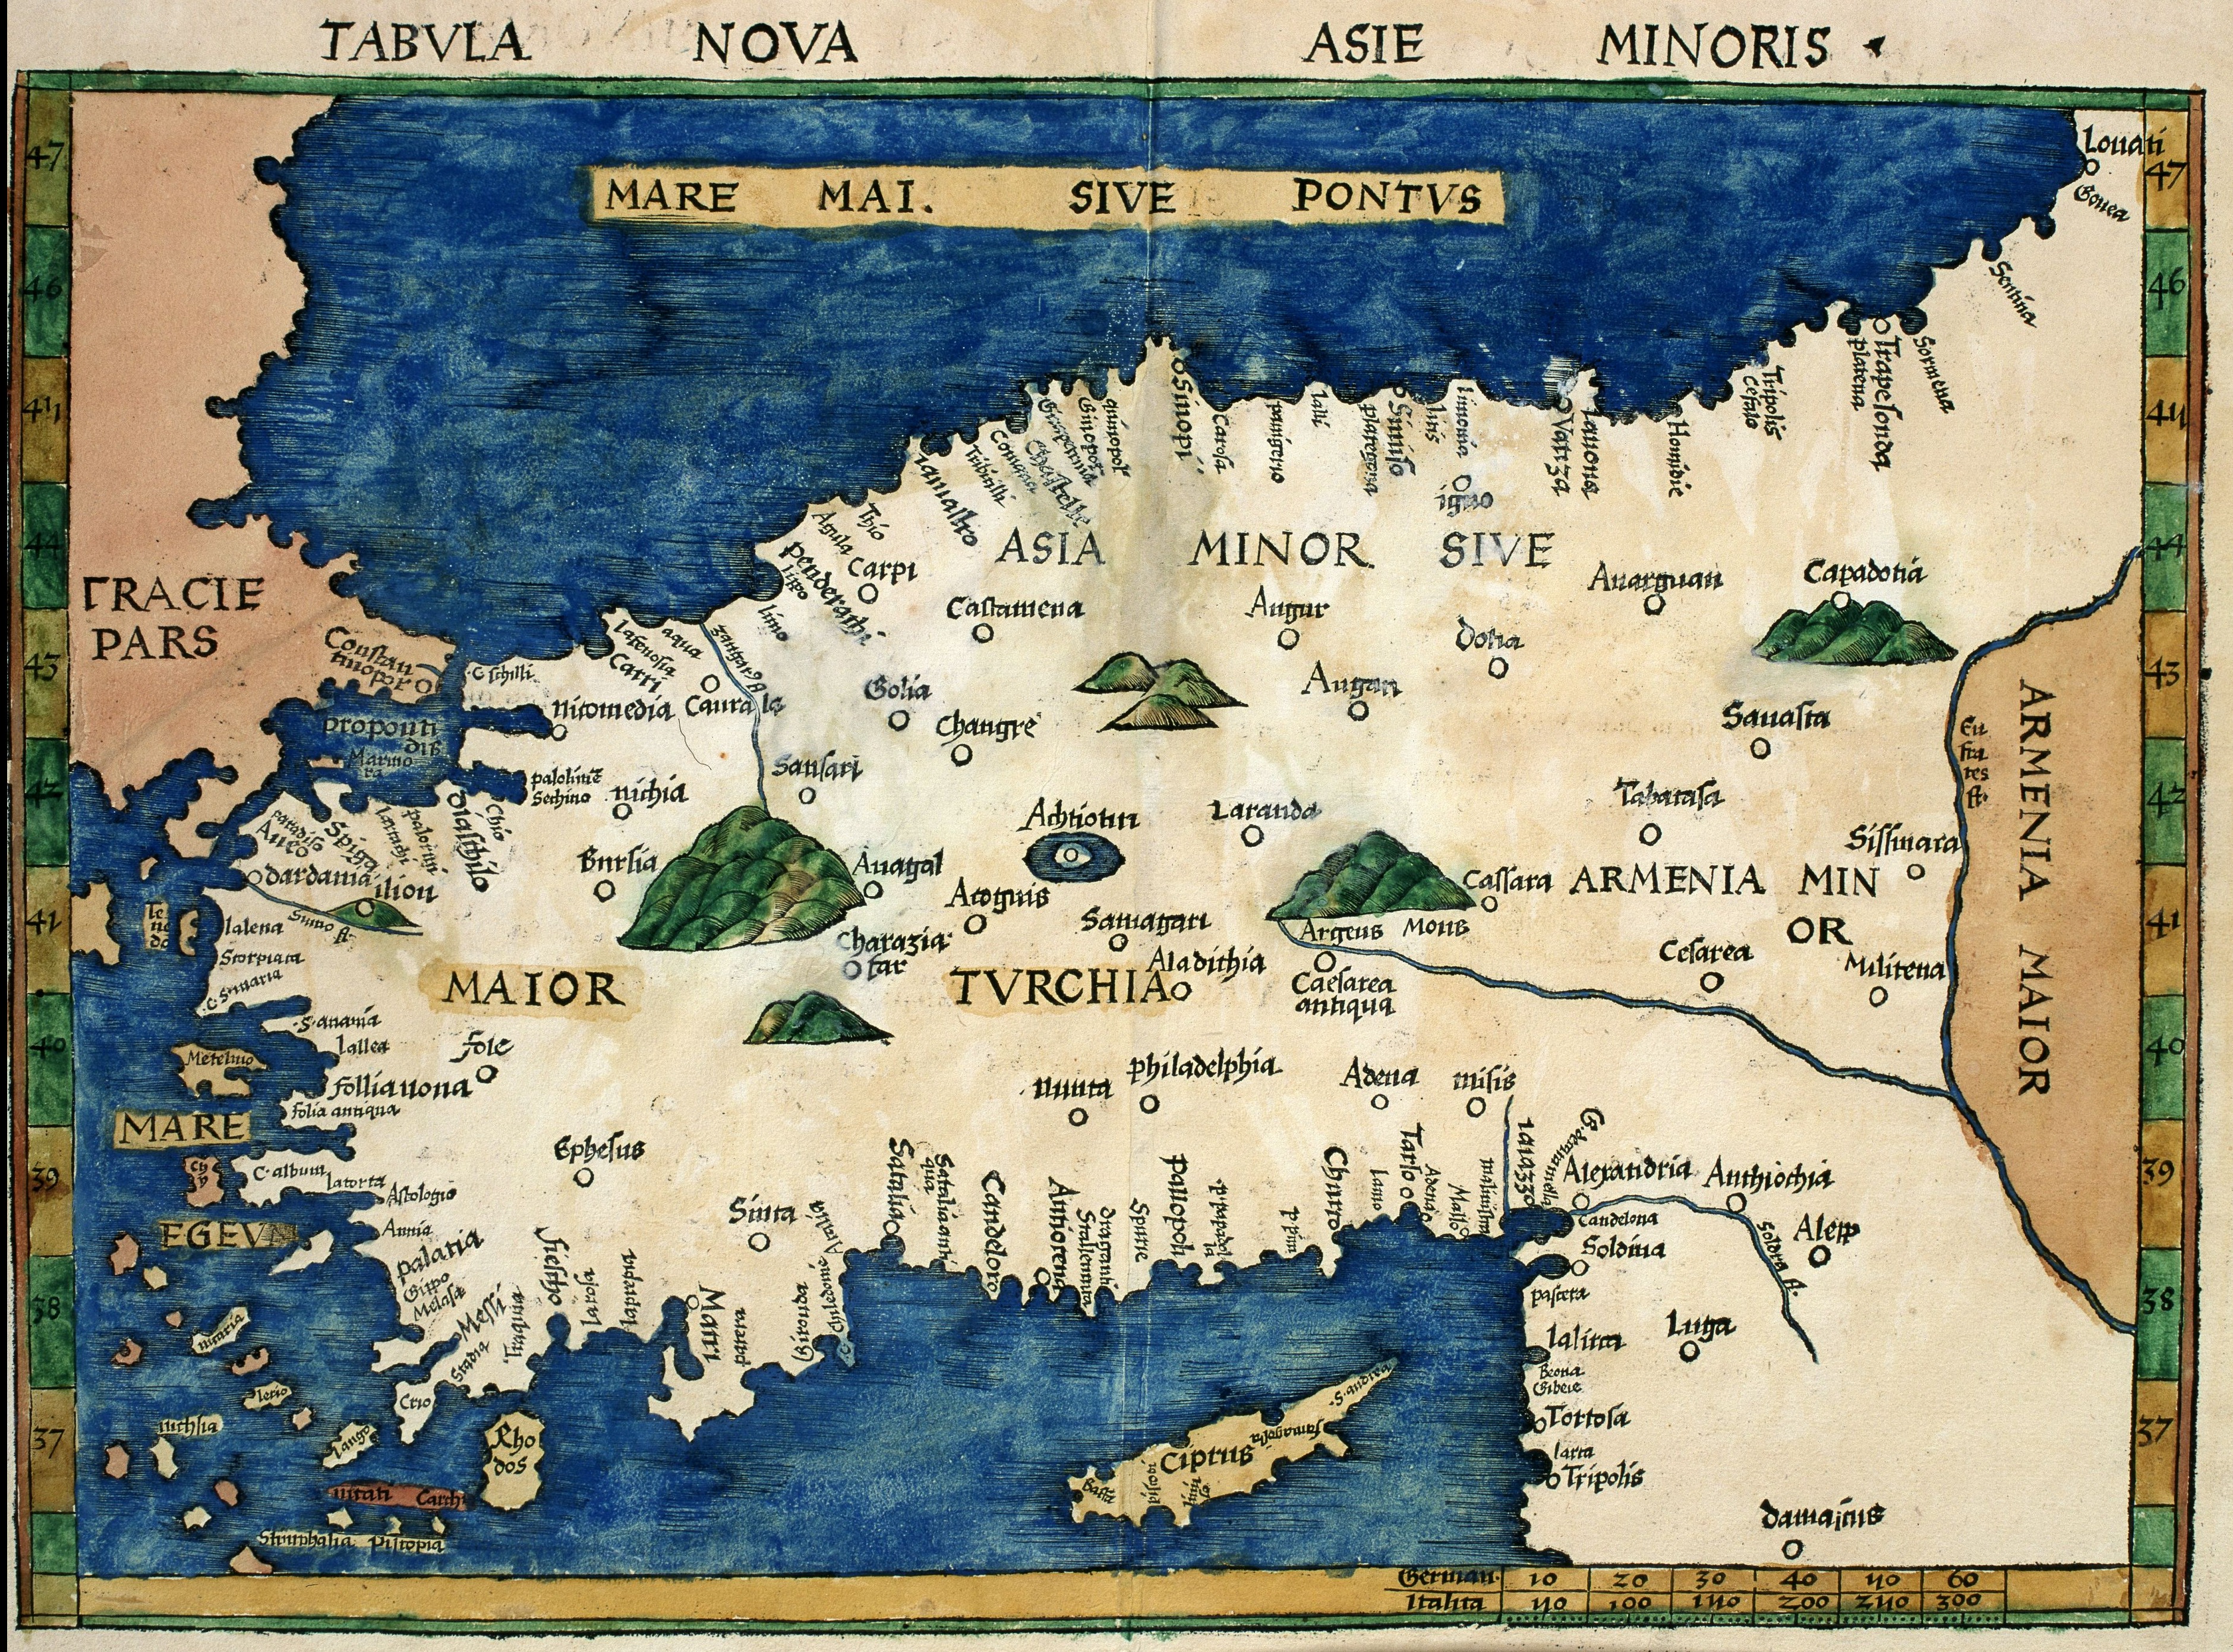 Map of early Turkey, showing mountains and major place names